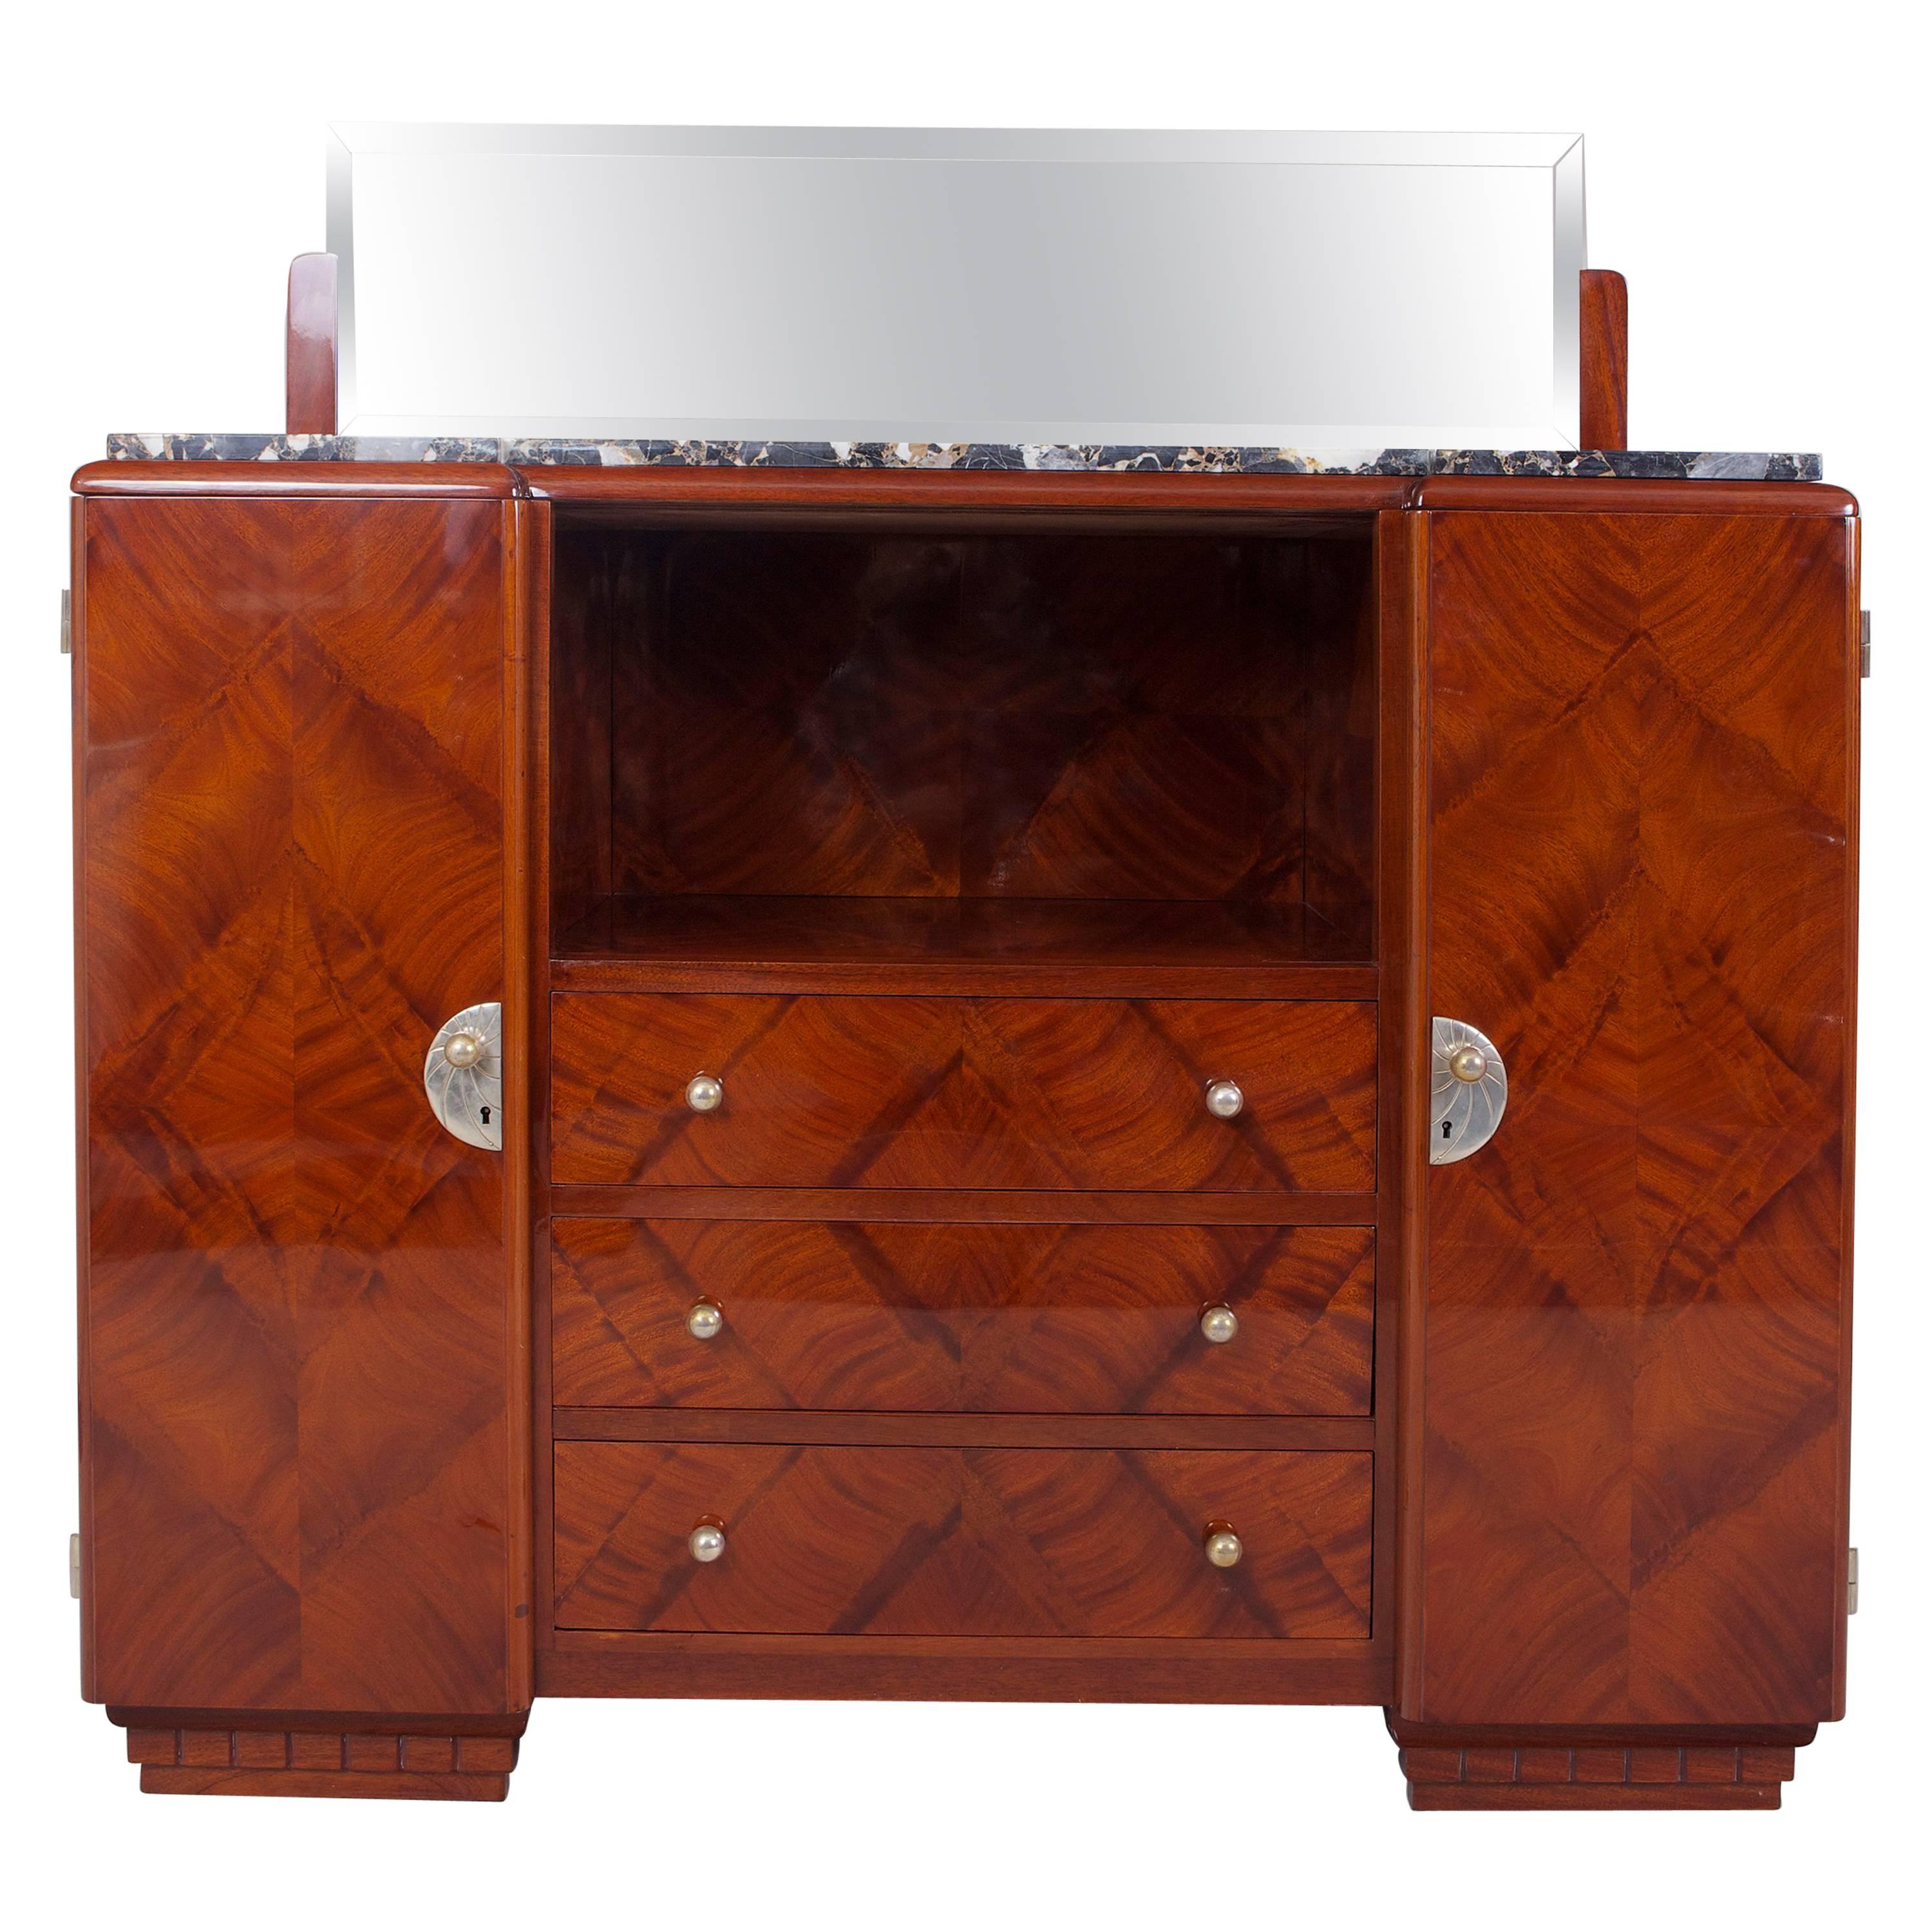 Mahogany Art Deco French Sideboard with Marble Desk and Mirror - 1920-1929 For Sale